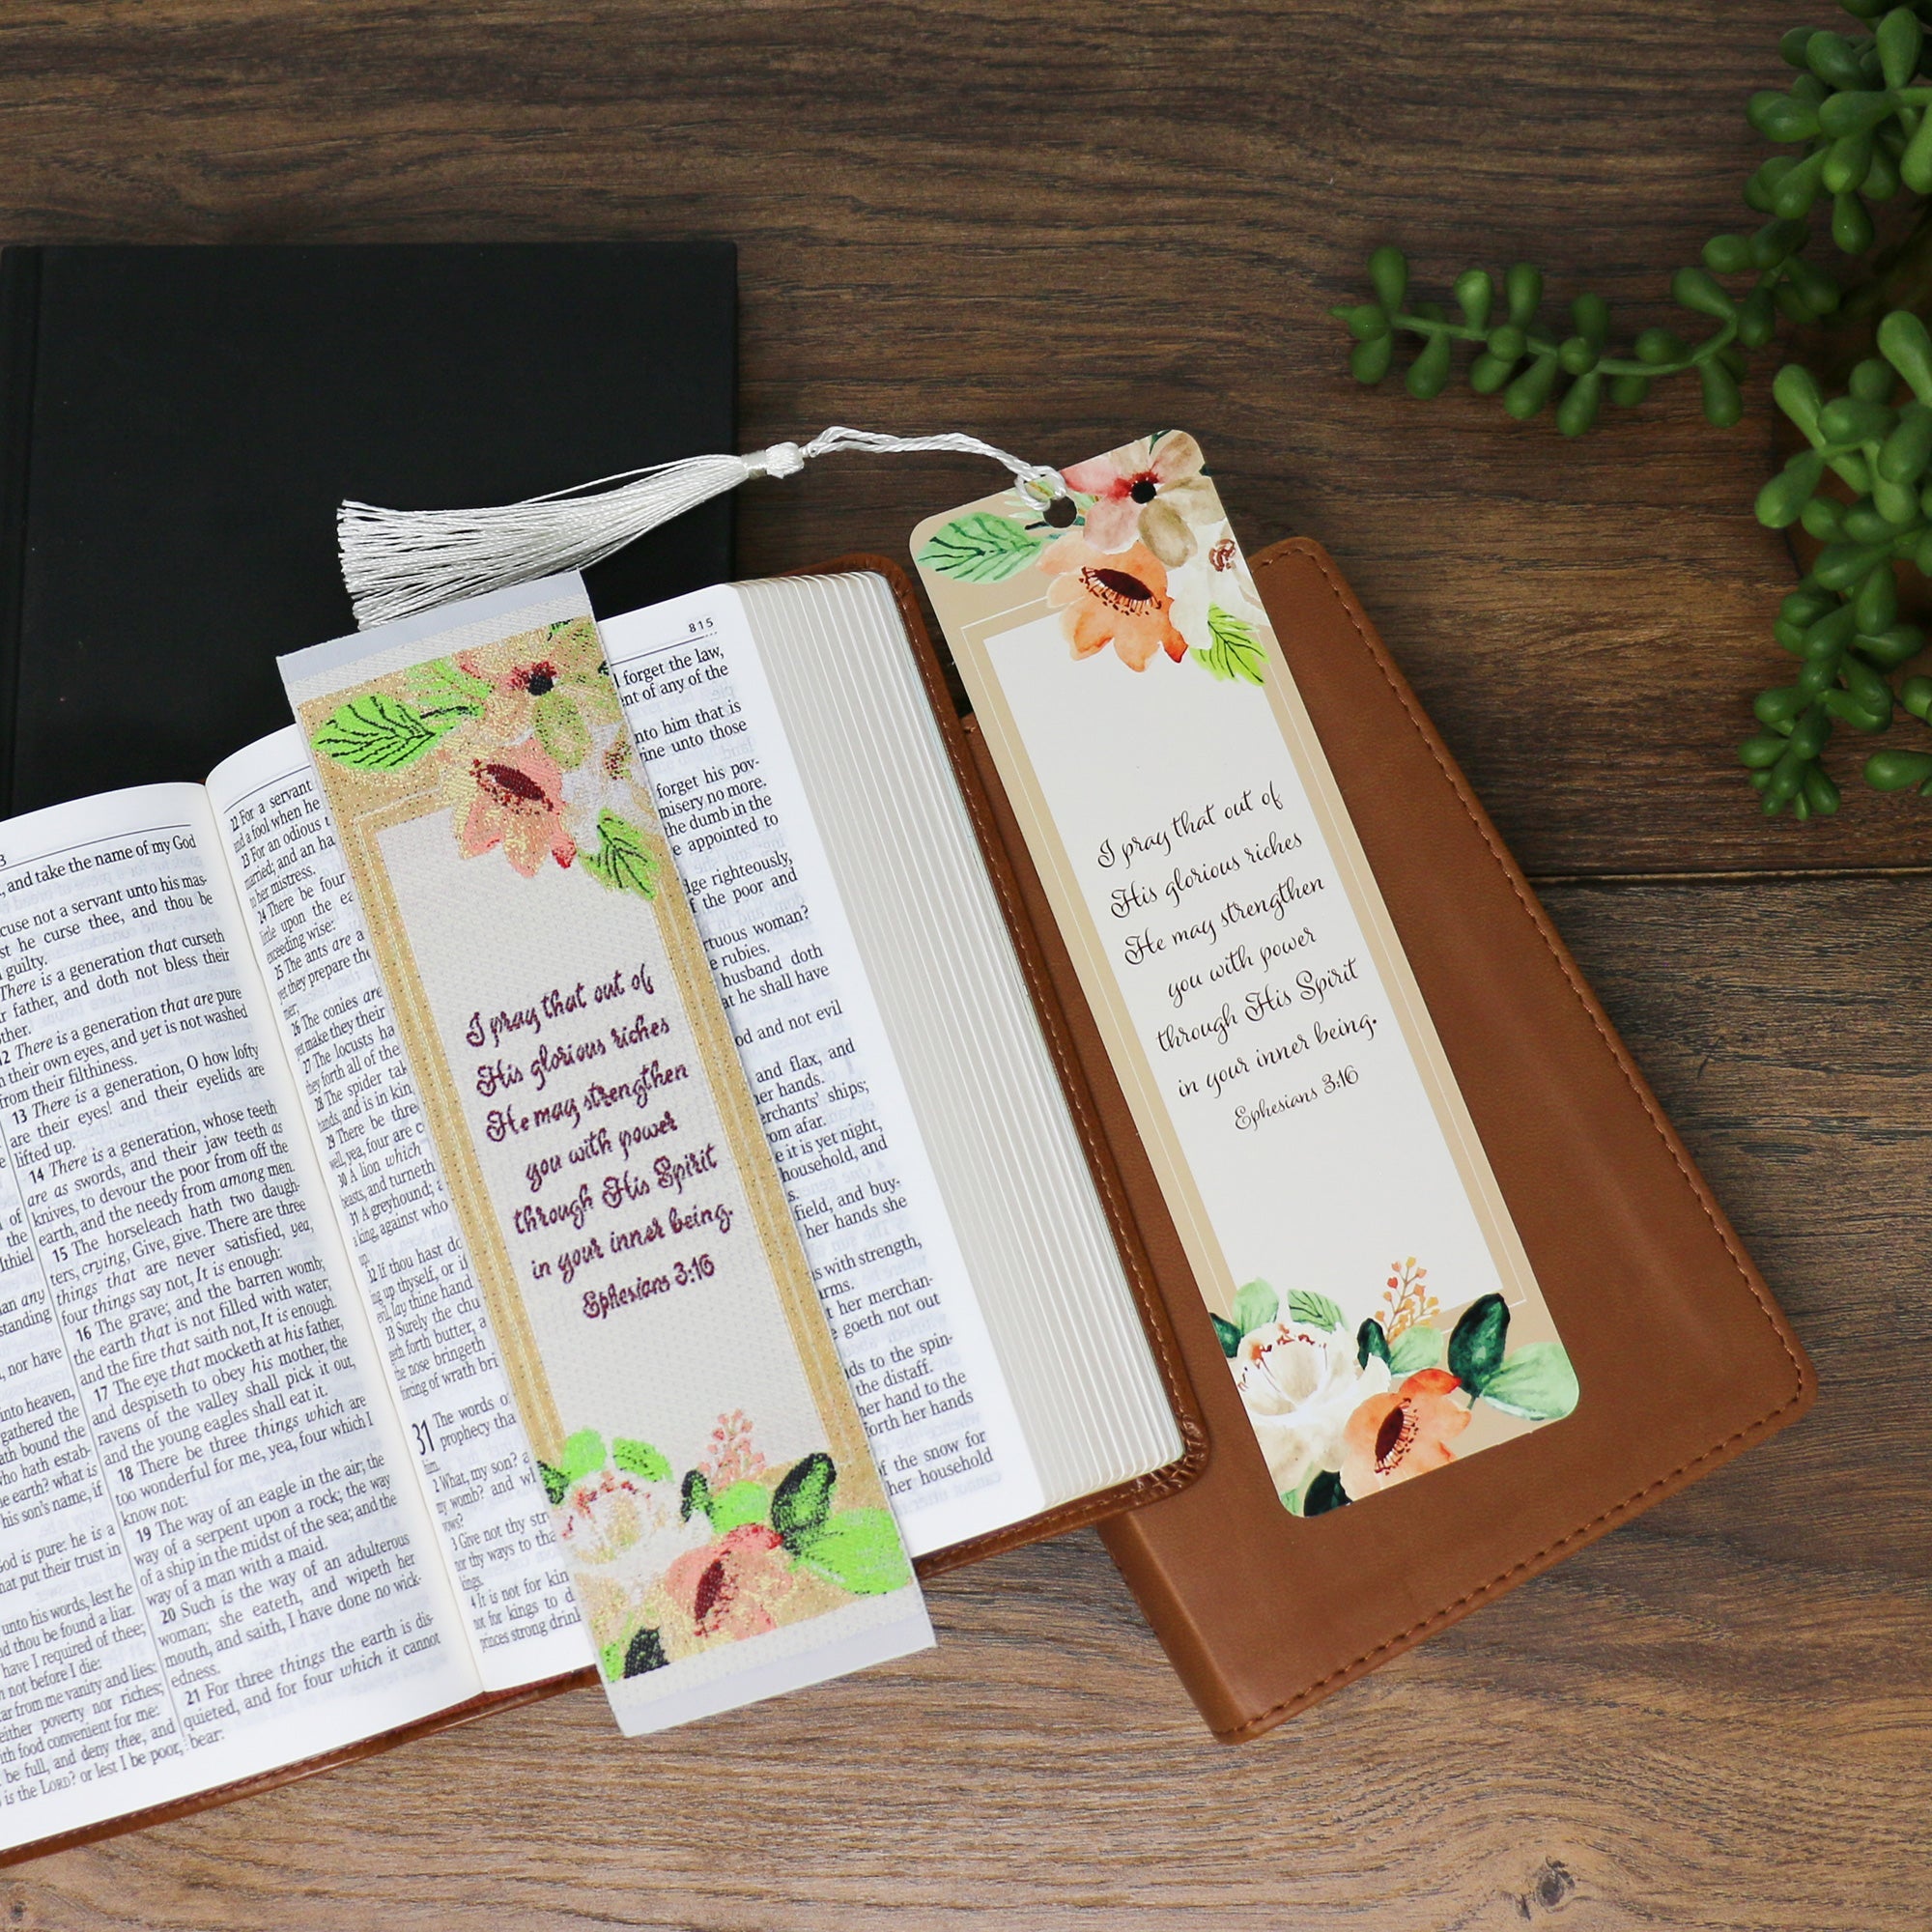 Strengthen you with power - Ephesians 3:16 Woven and Tasseled Bookmark Set